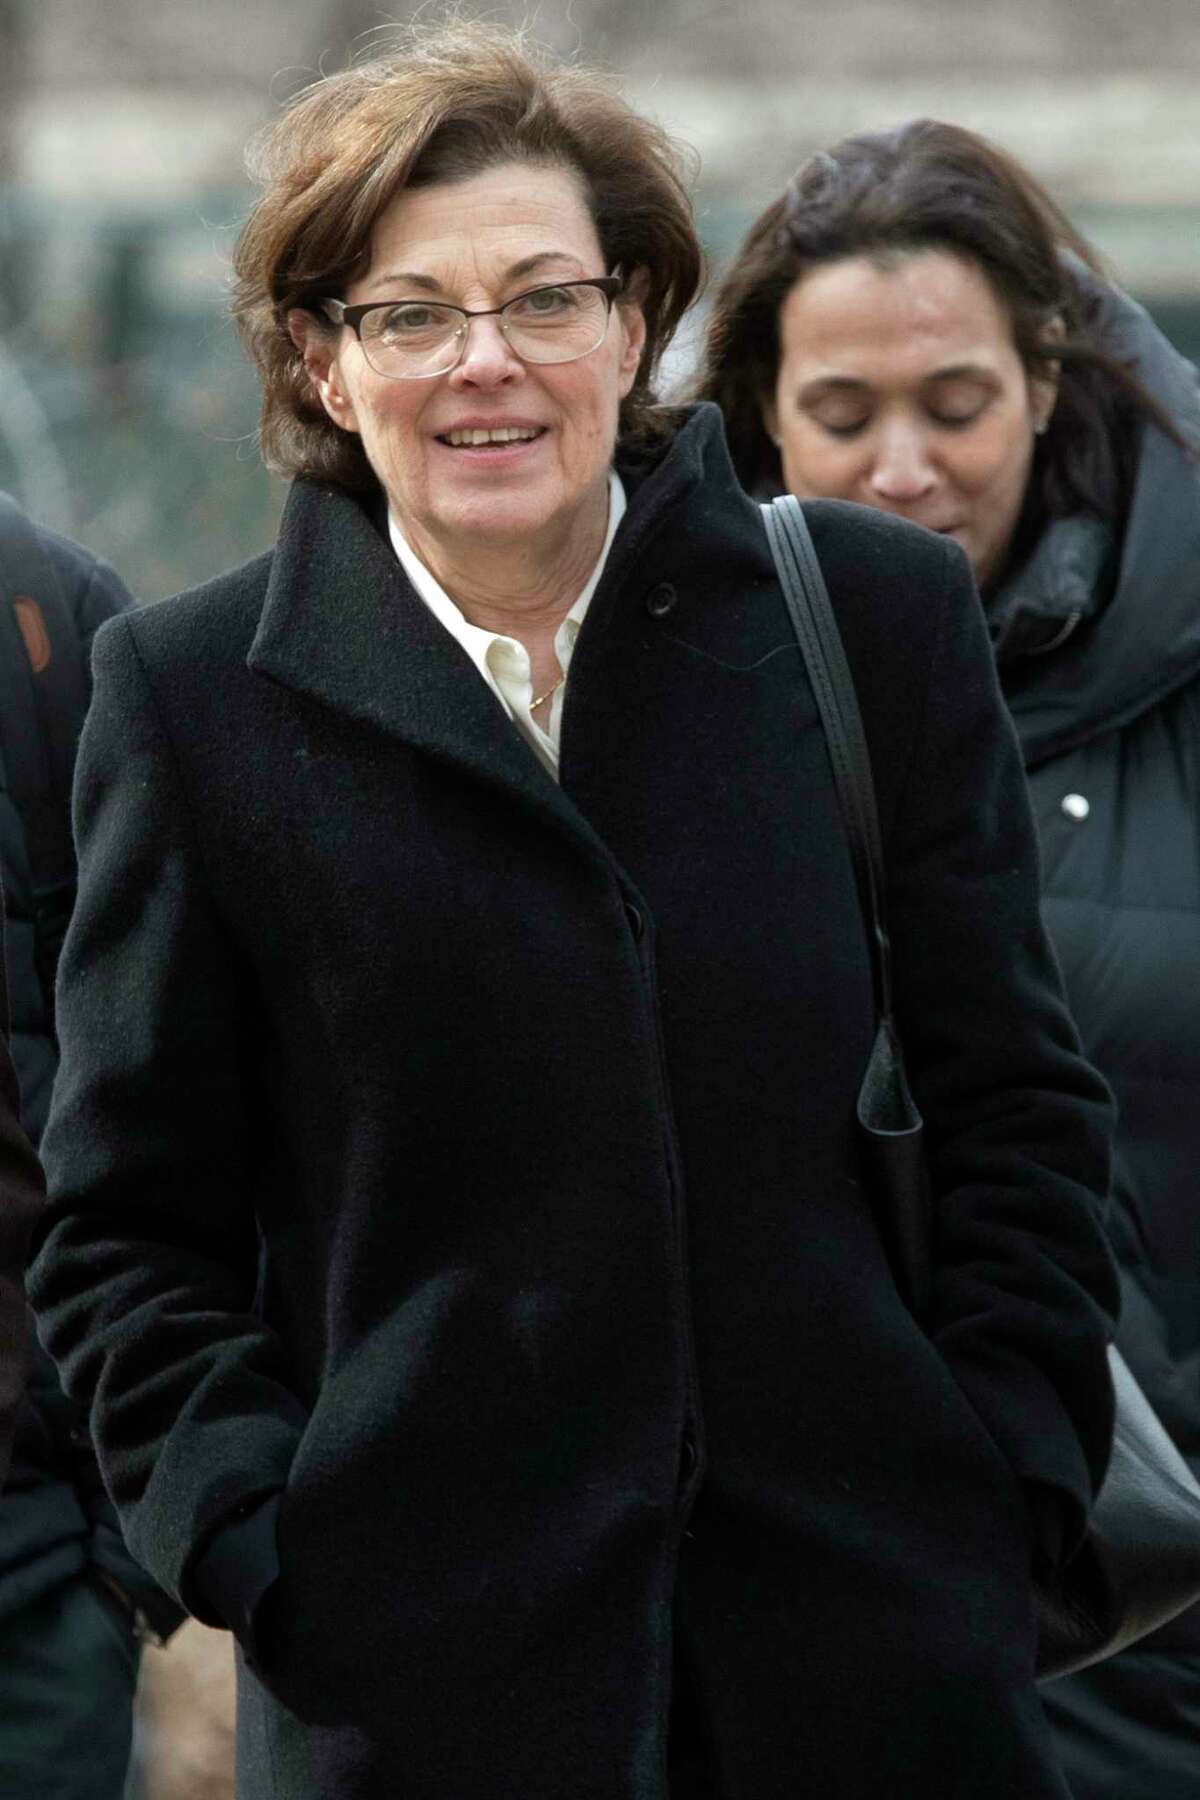 Nancy Salzman arrives at Brooklyn federal court on Wednesday, March 13, 2019. She was the first of six defendants in the federal criminal case to plead guilty. (Mary Altaffer / Associated Press)